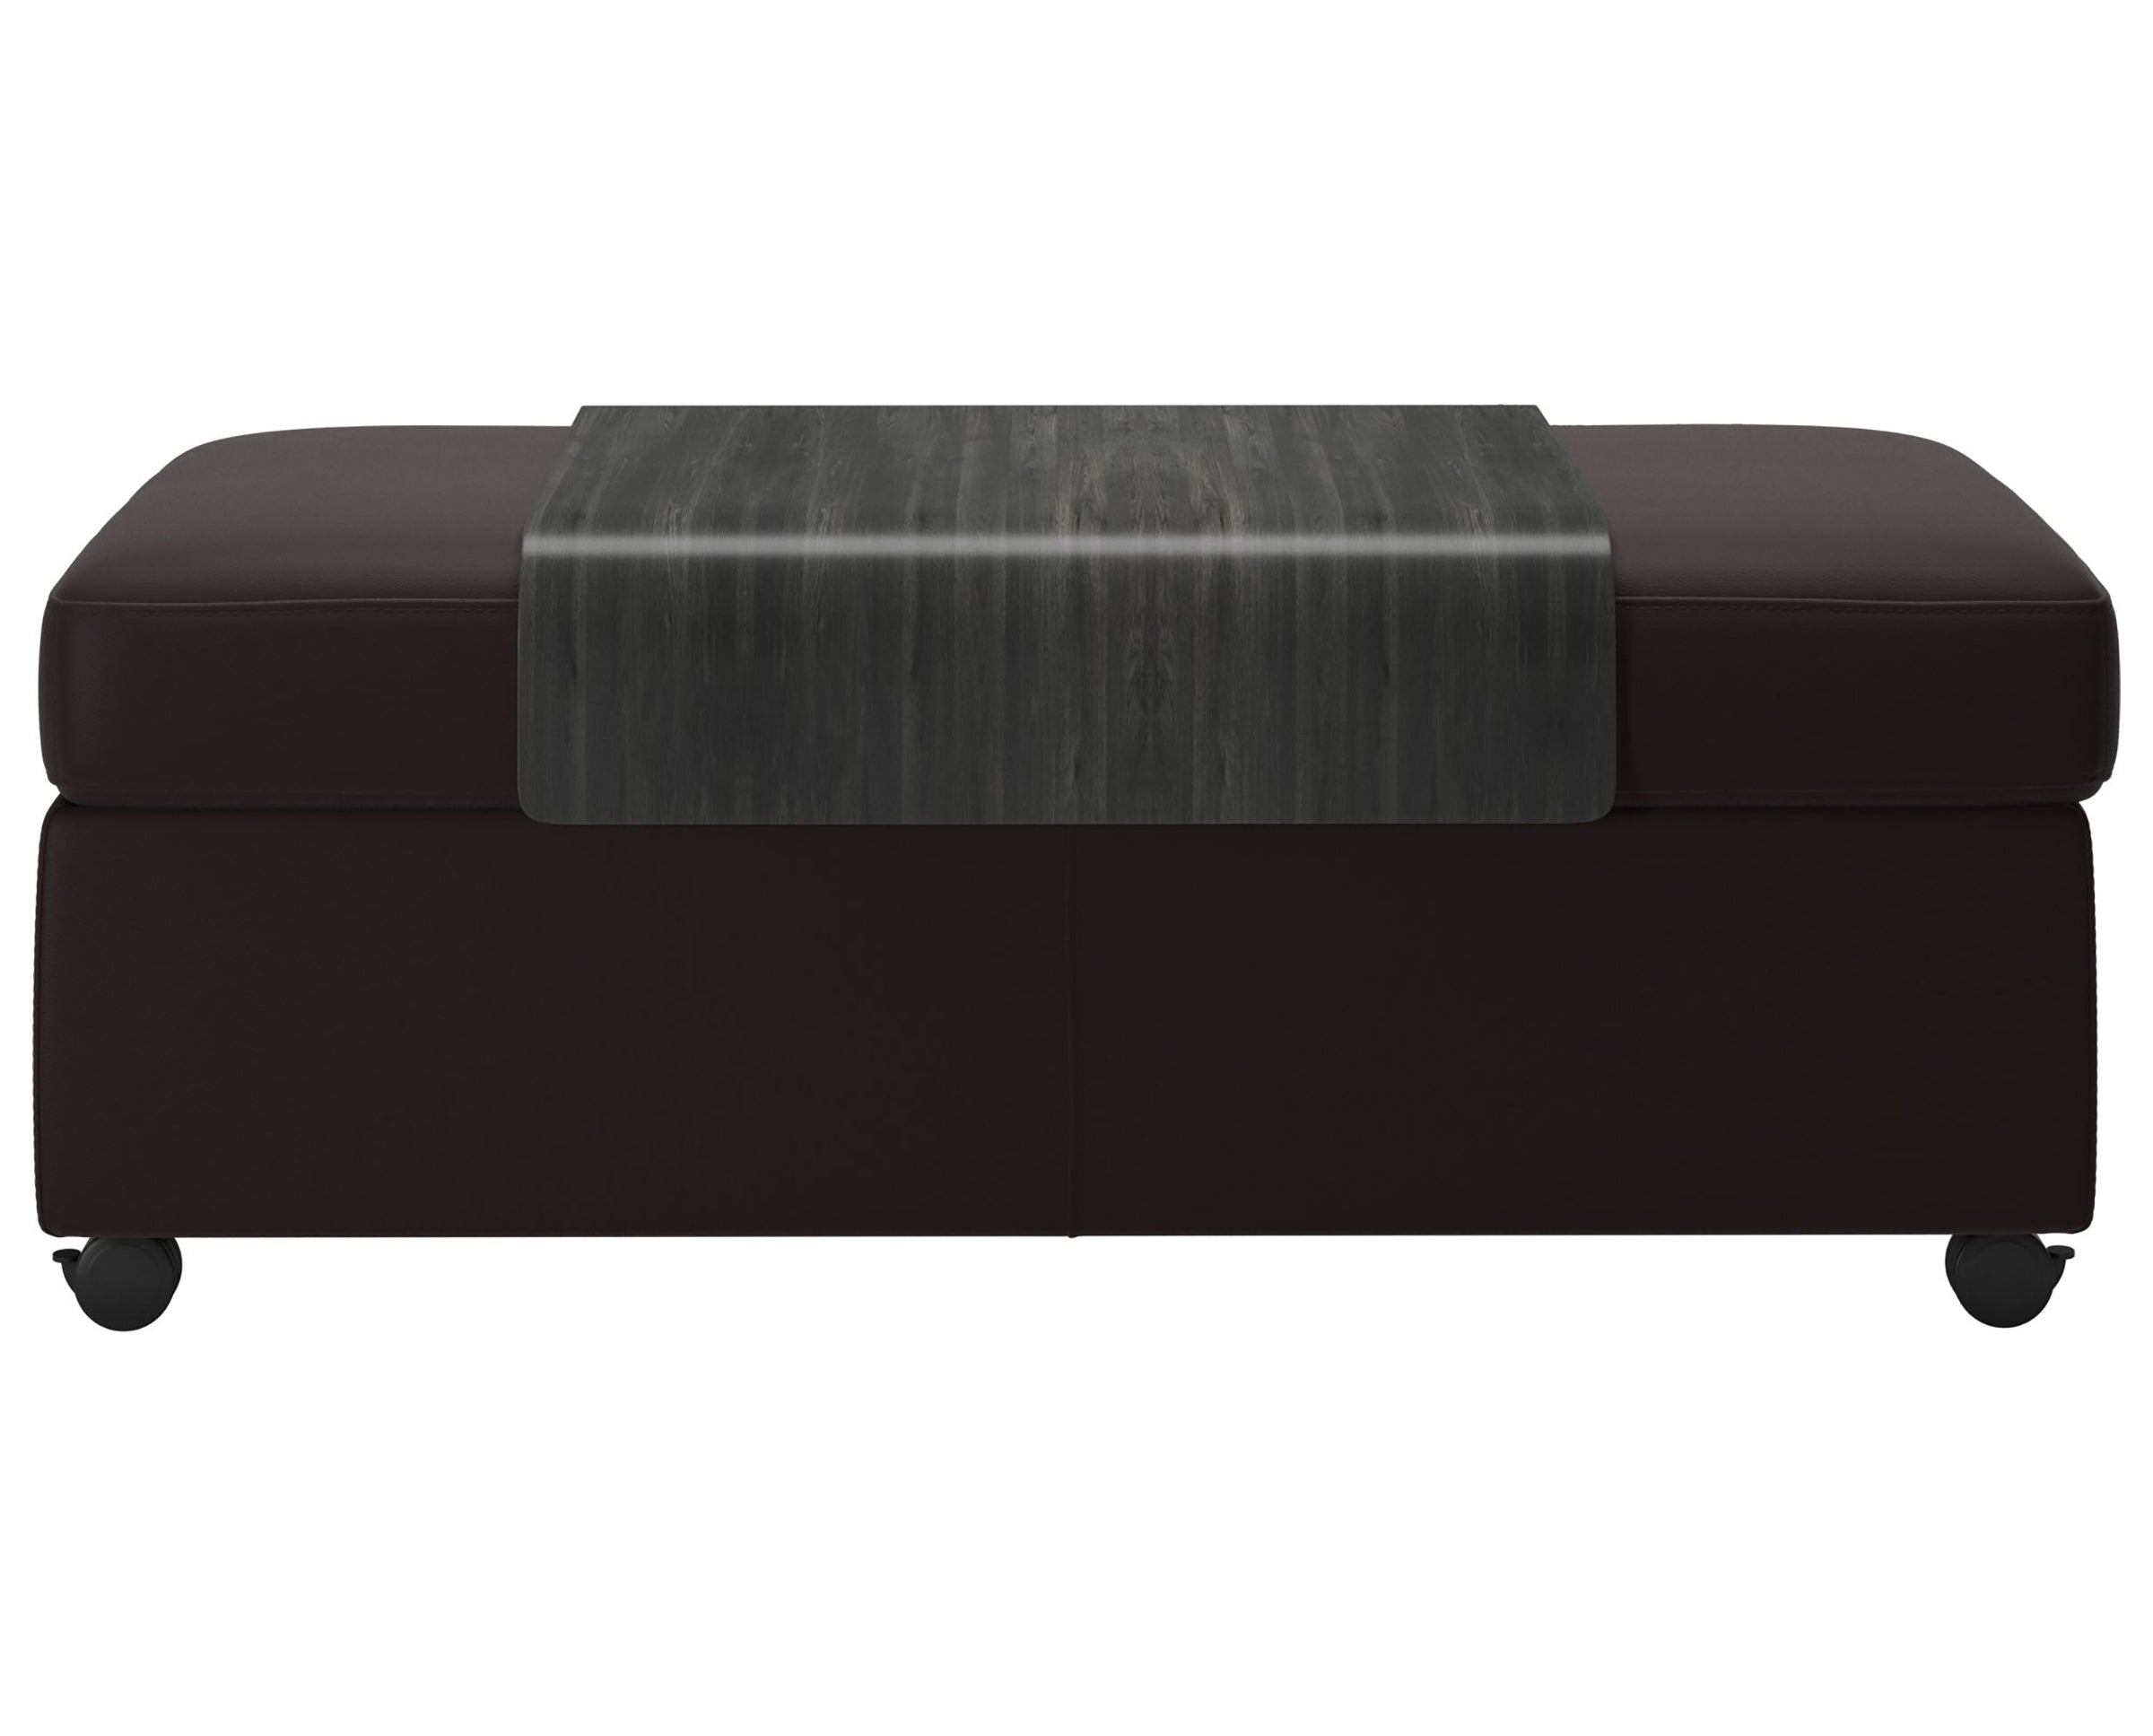 Paloma Leather Chocolate and Grey Finish | Stressless Double Ottoman with Table | Valley Ridge Furniture